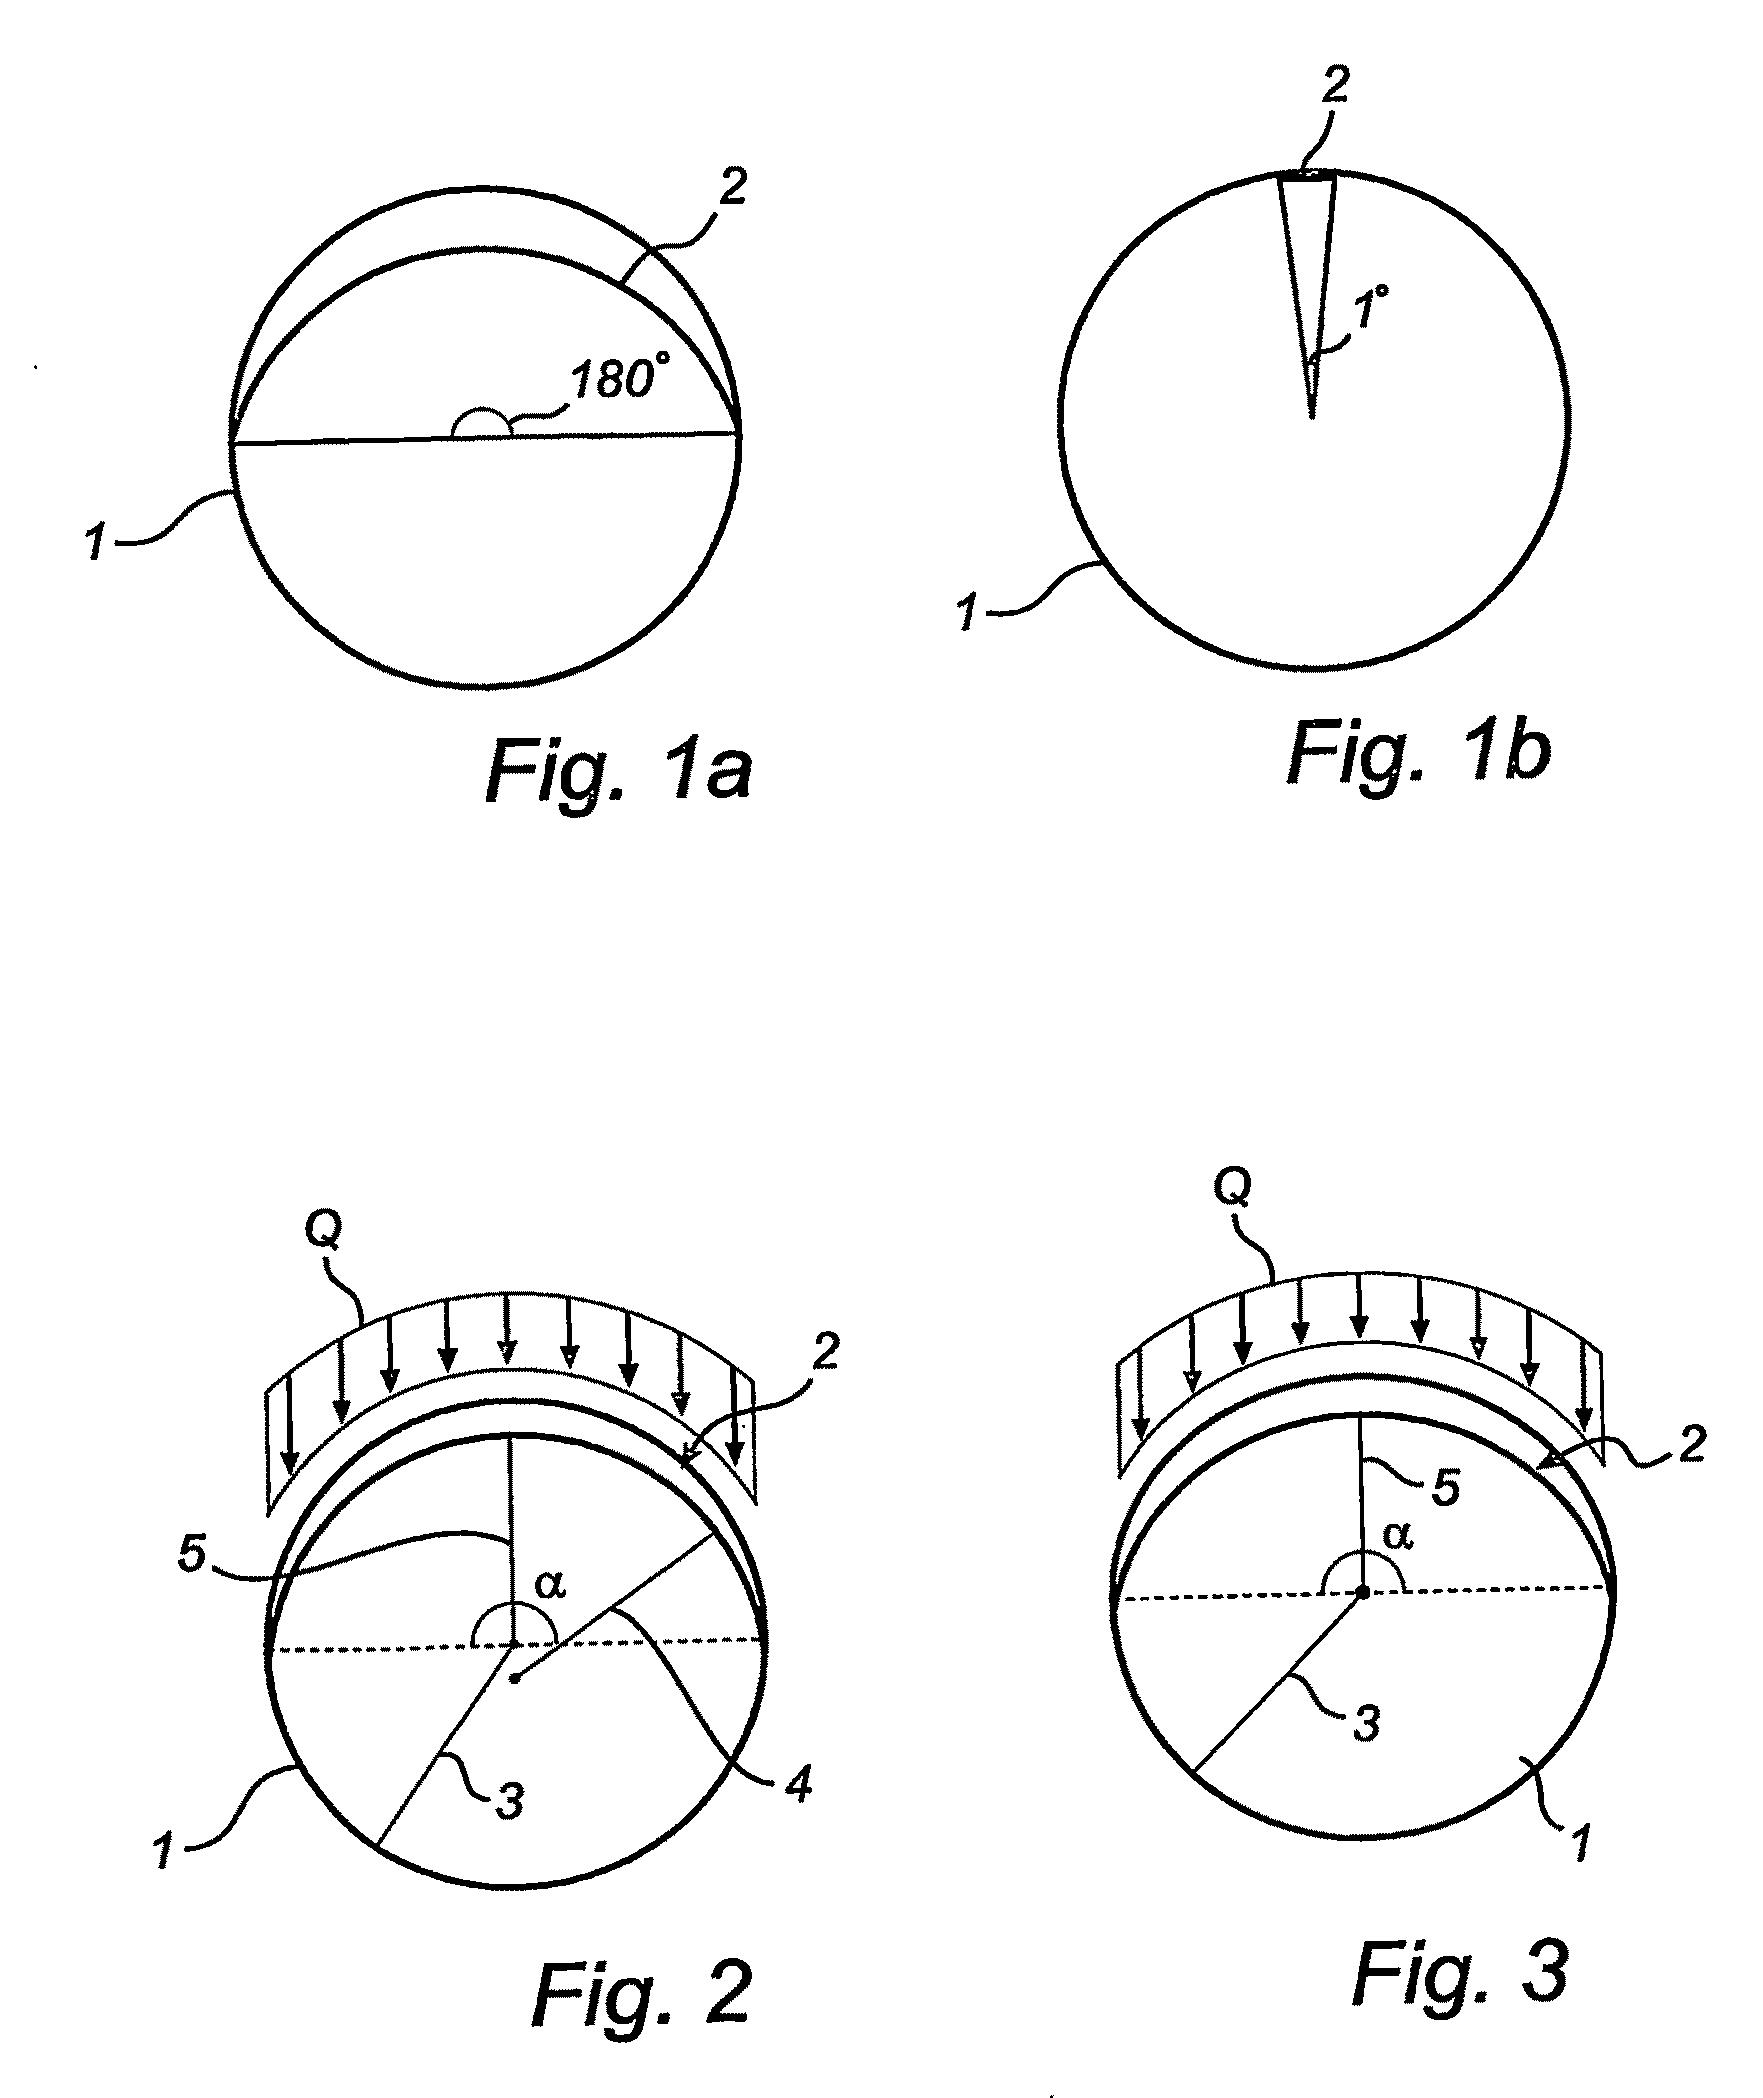 Non-rotating shaft for a continuous casting machine